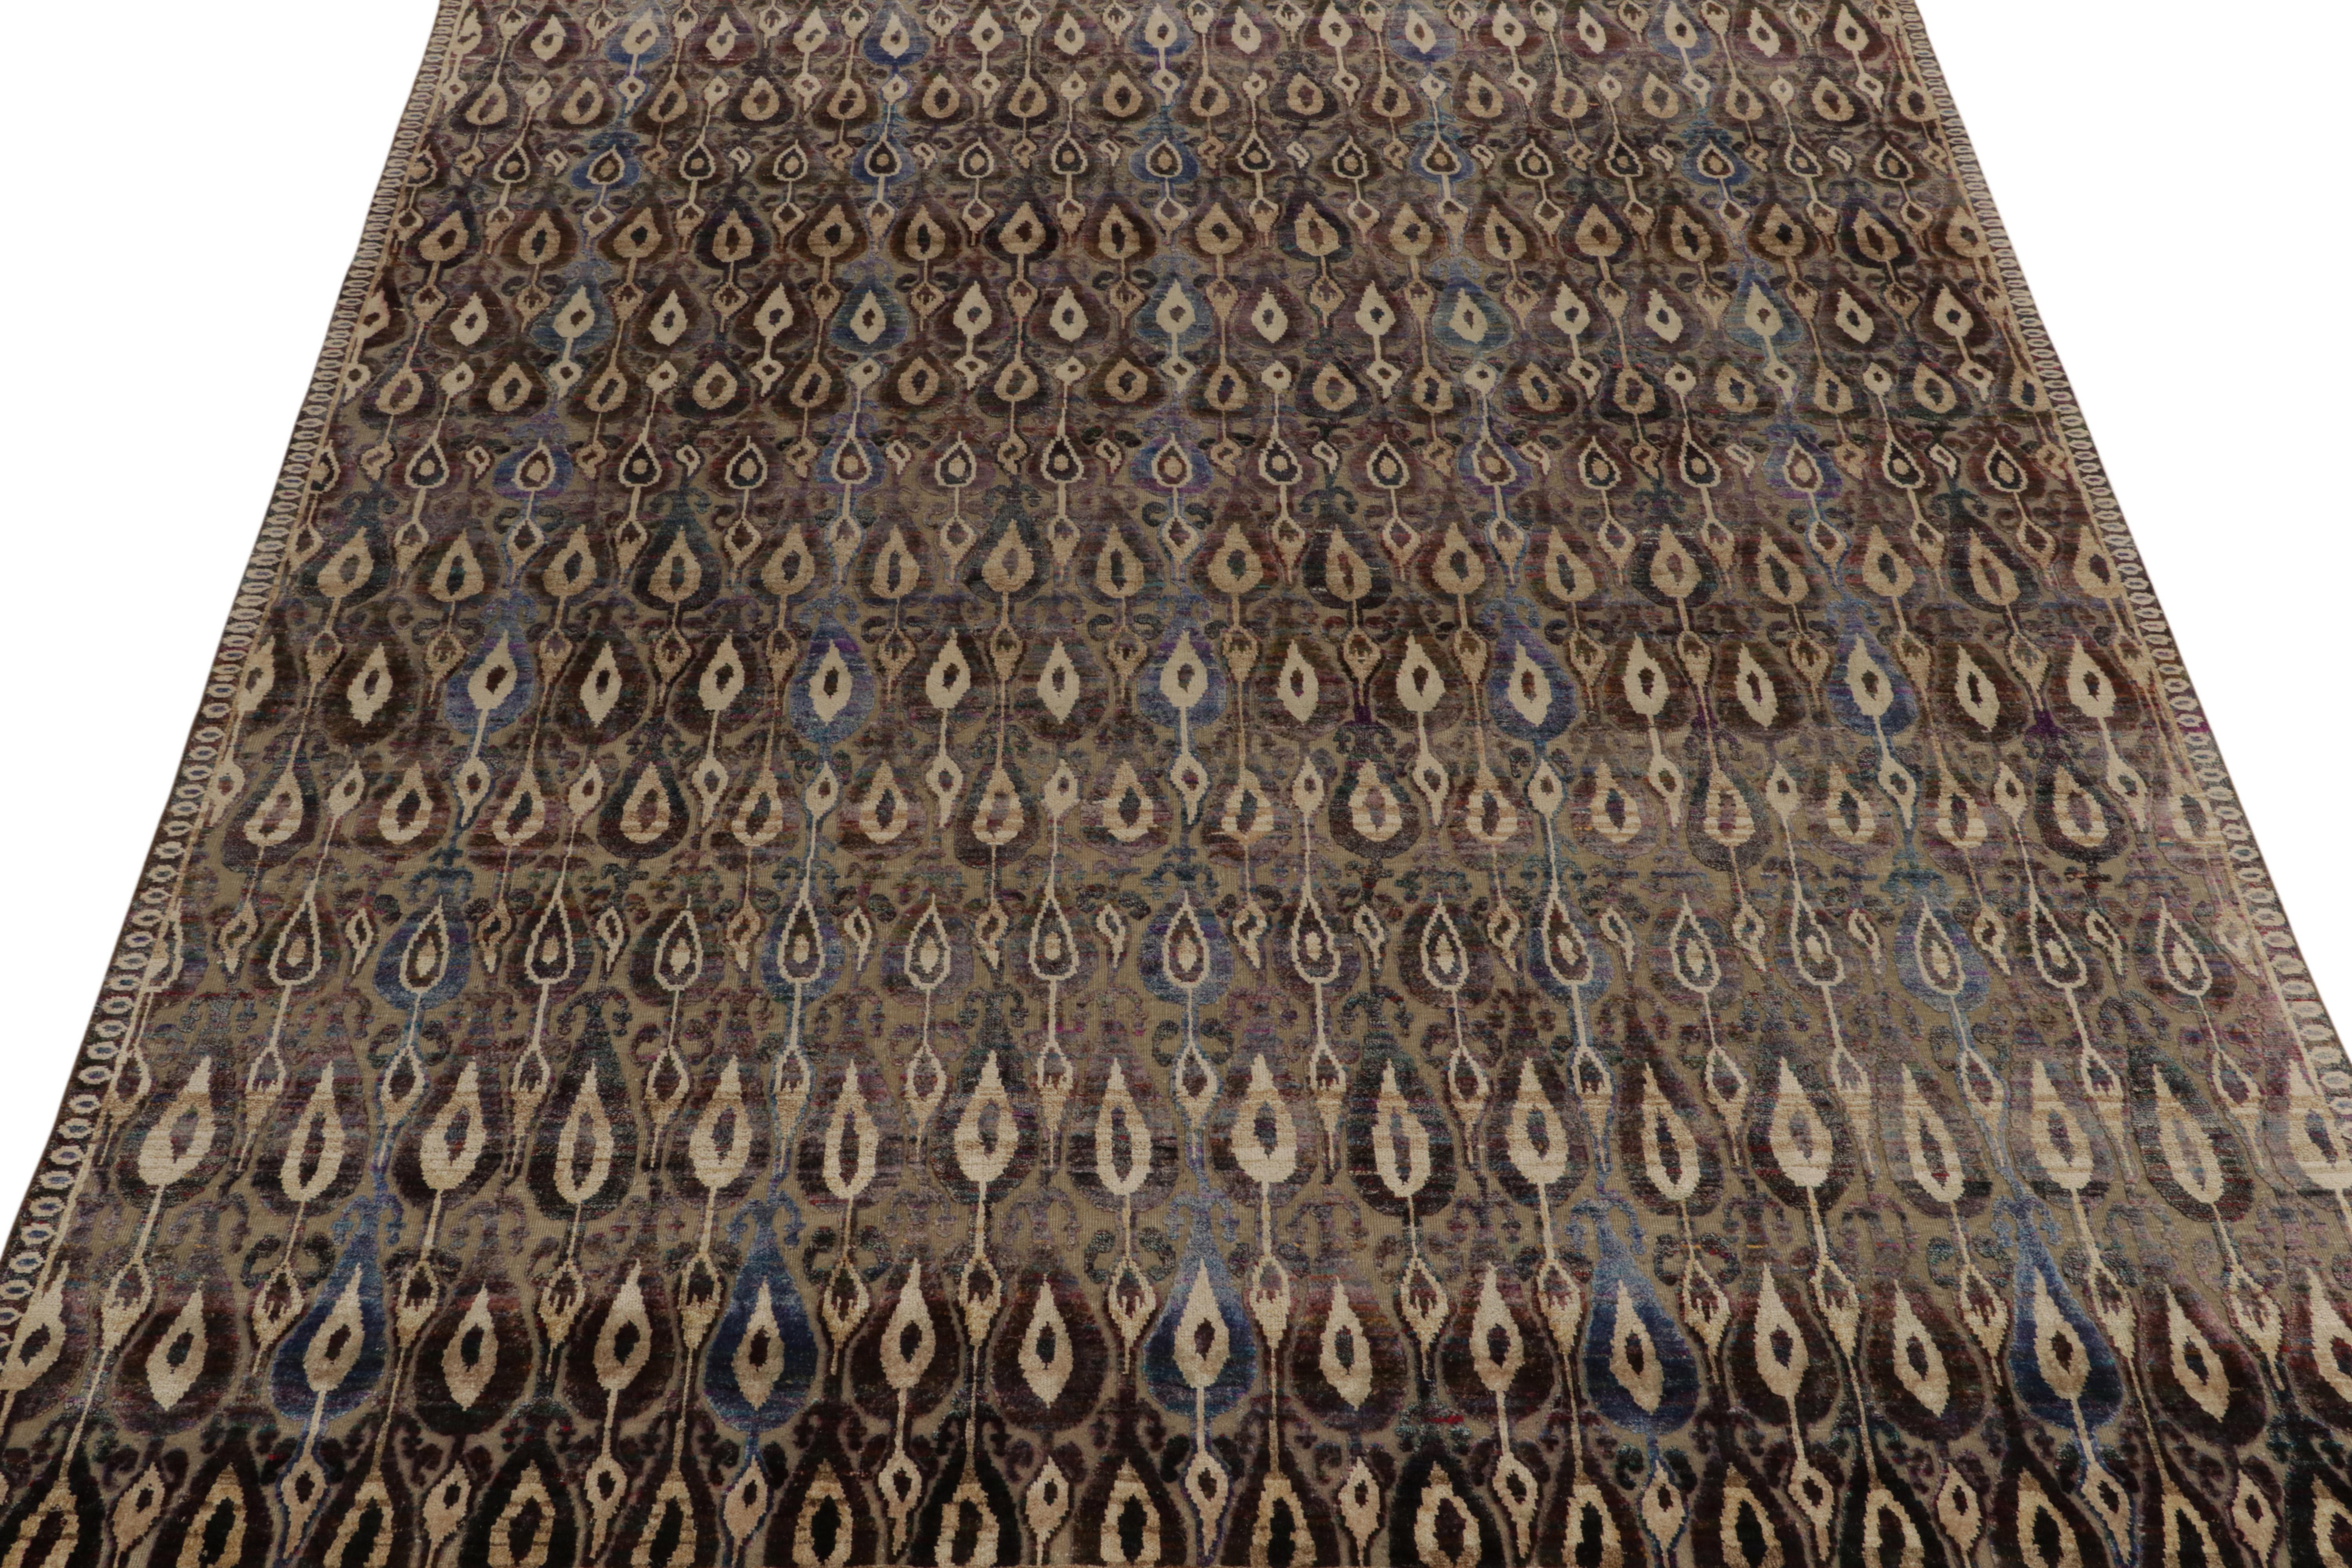 Indian Rug & Kilim’s Classic Style Rug in Beige-Brown, Red and Blue Ikats Patterns For Sale